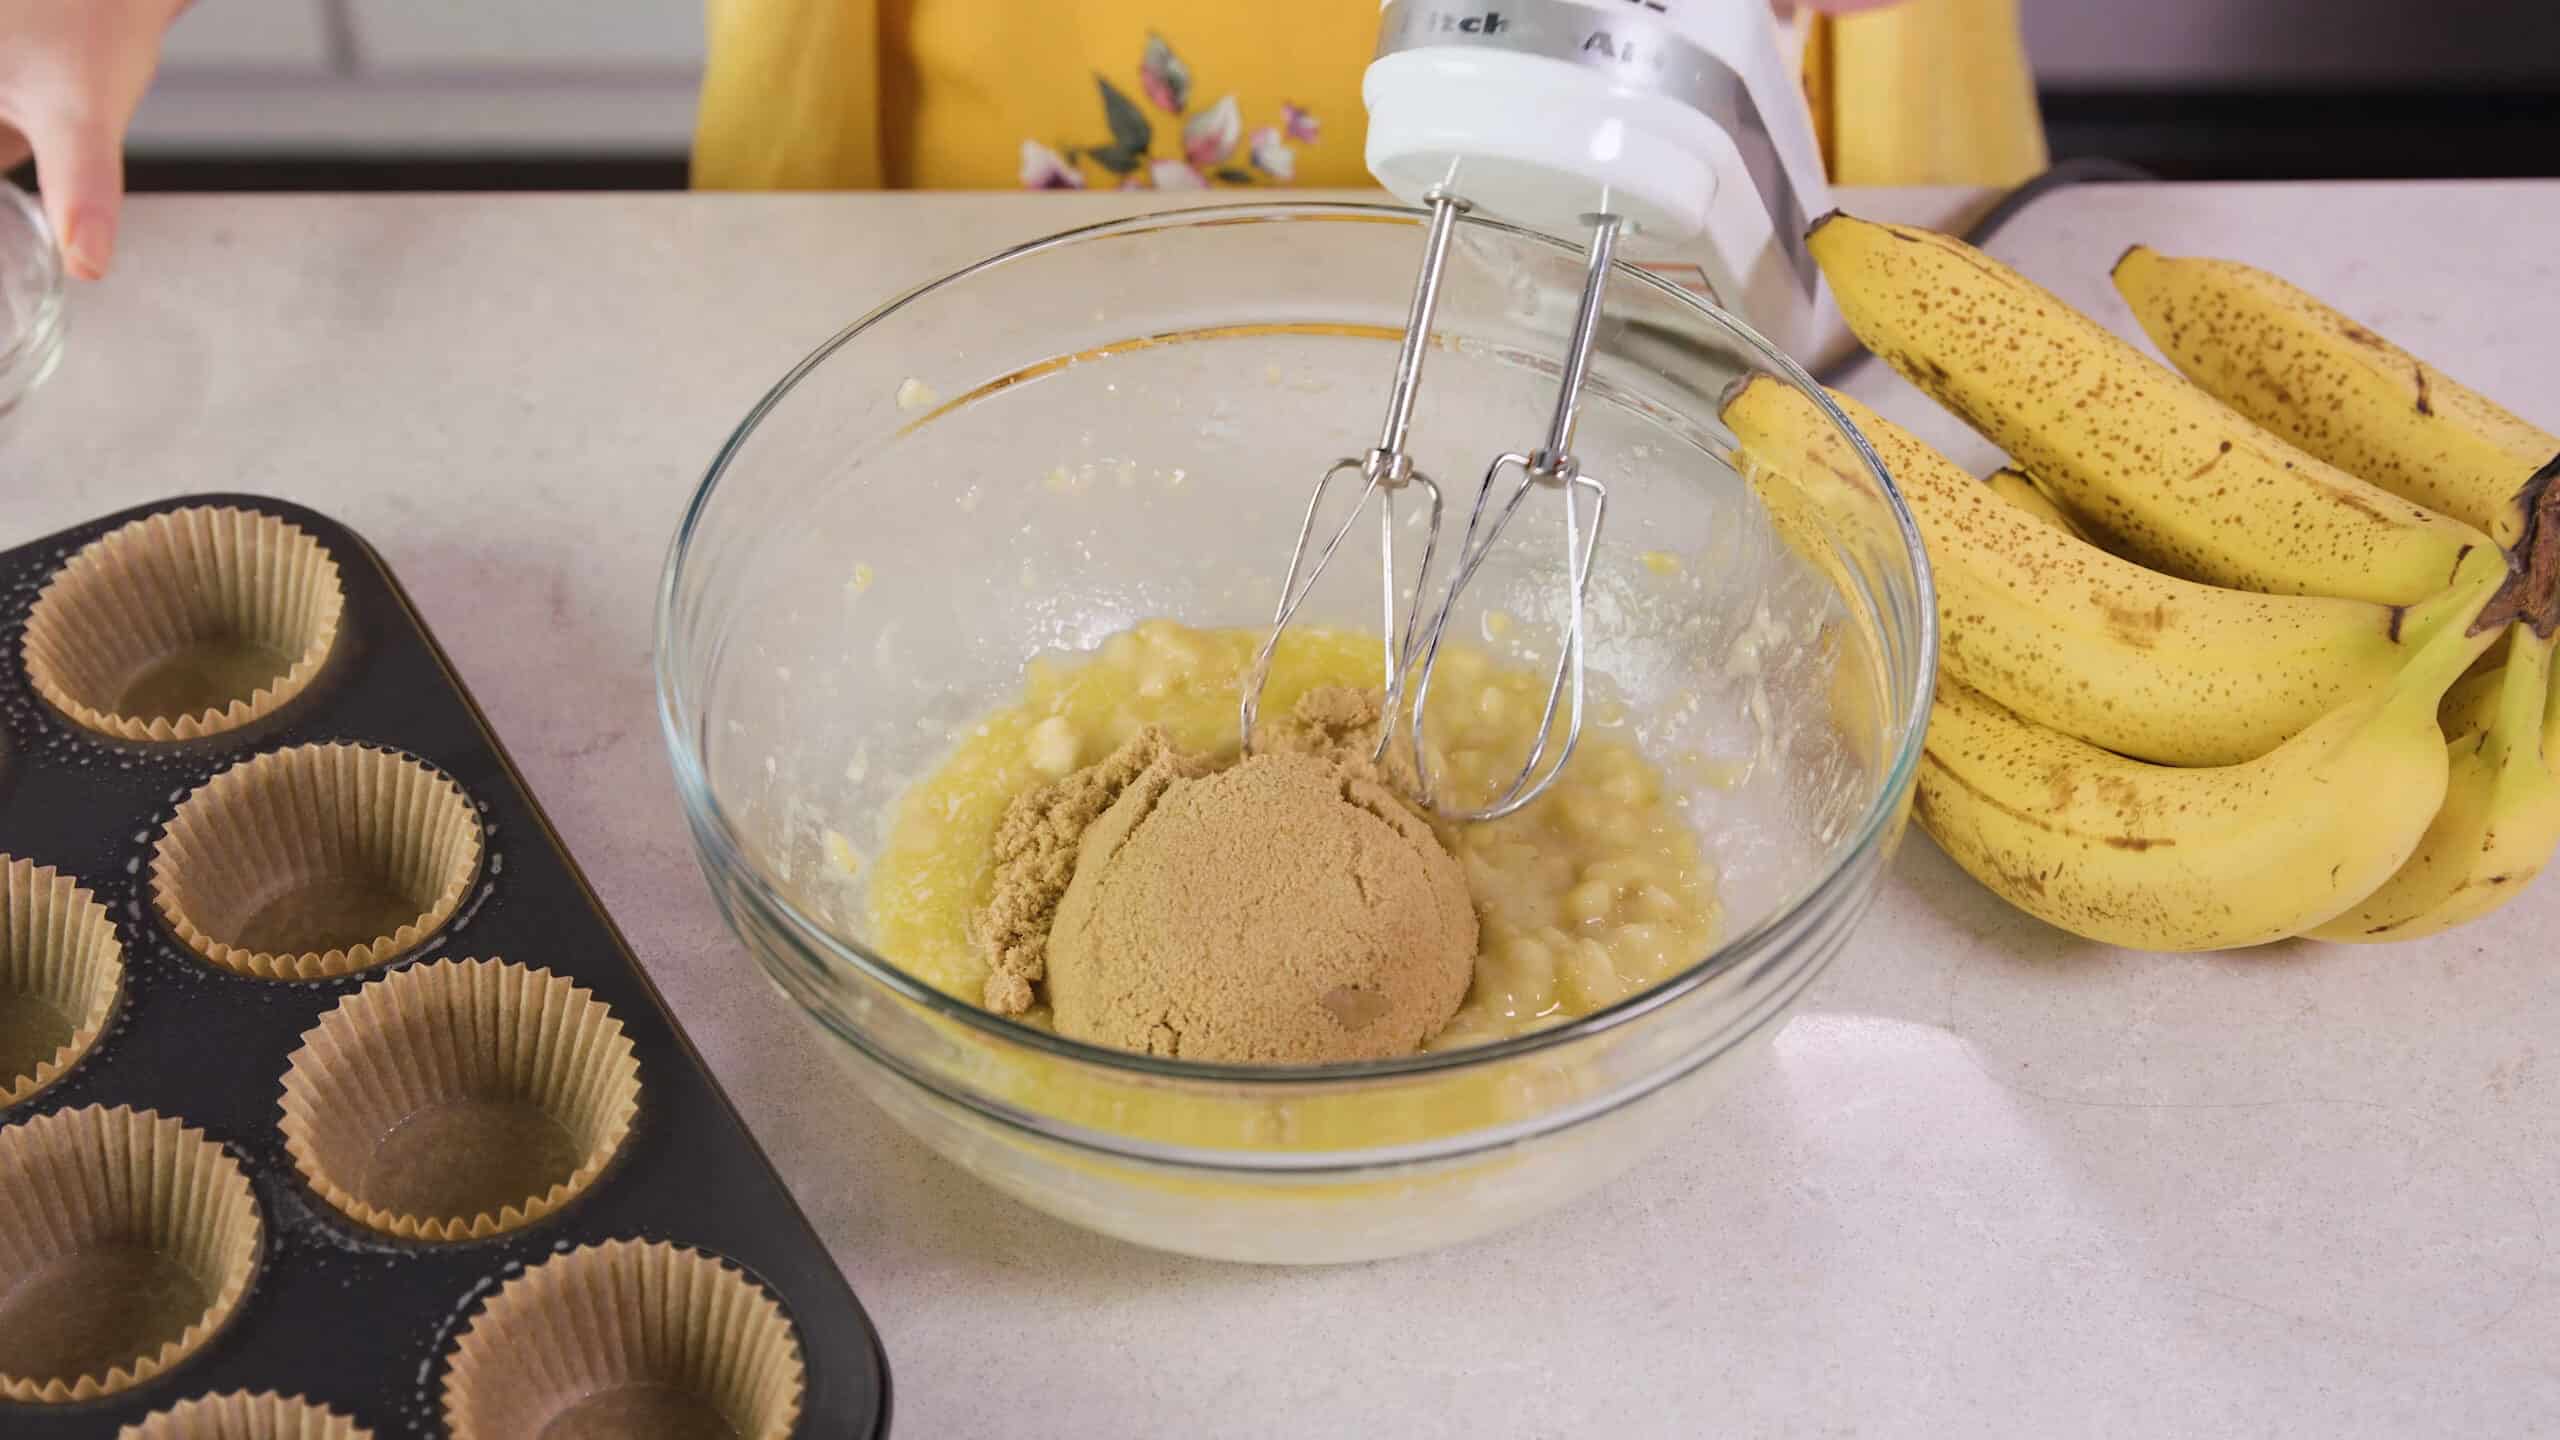 Angled view of a large clear glass mixing bowl filled with mashed bananas and brown sugar with wire beaters connected to a hand mixer ready to combine.